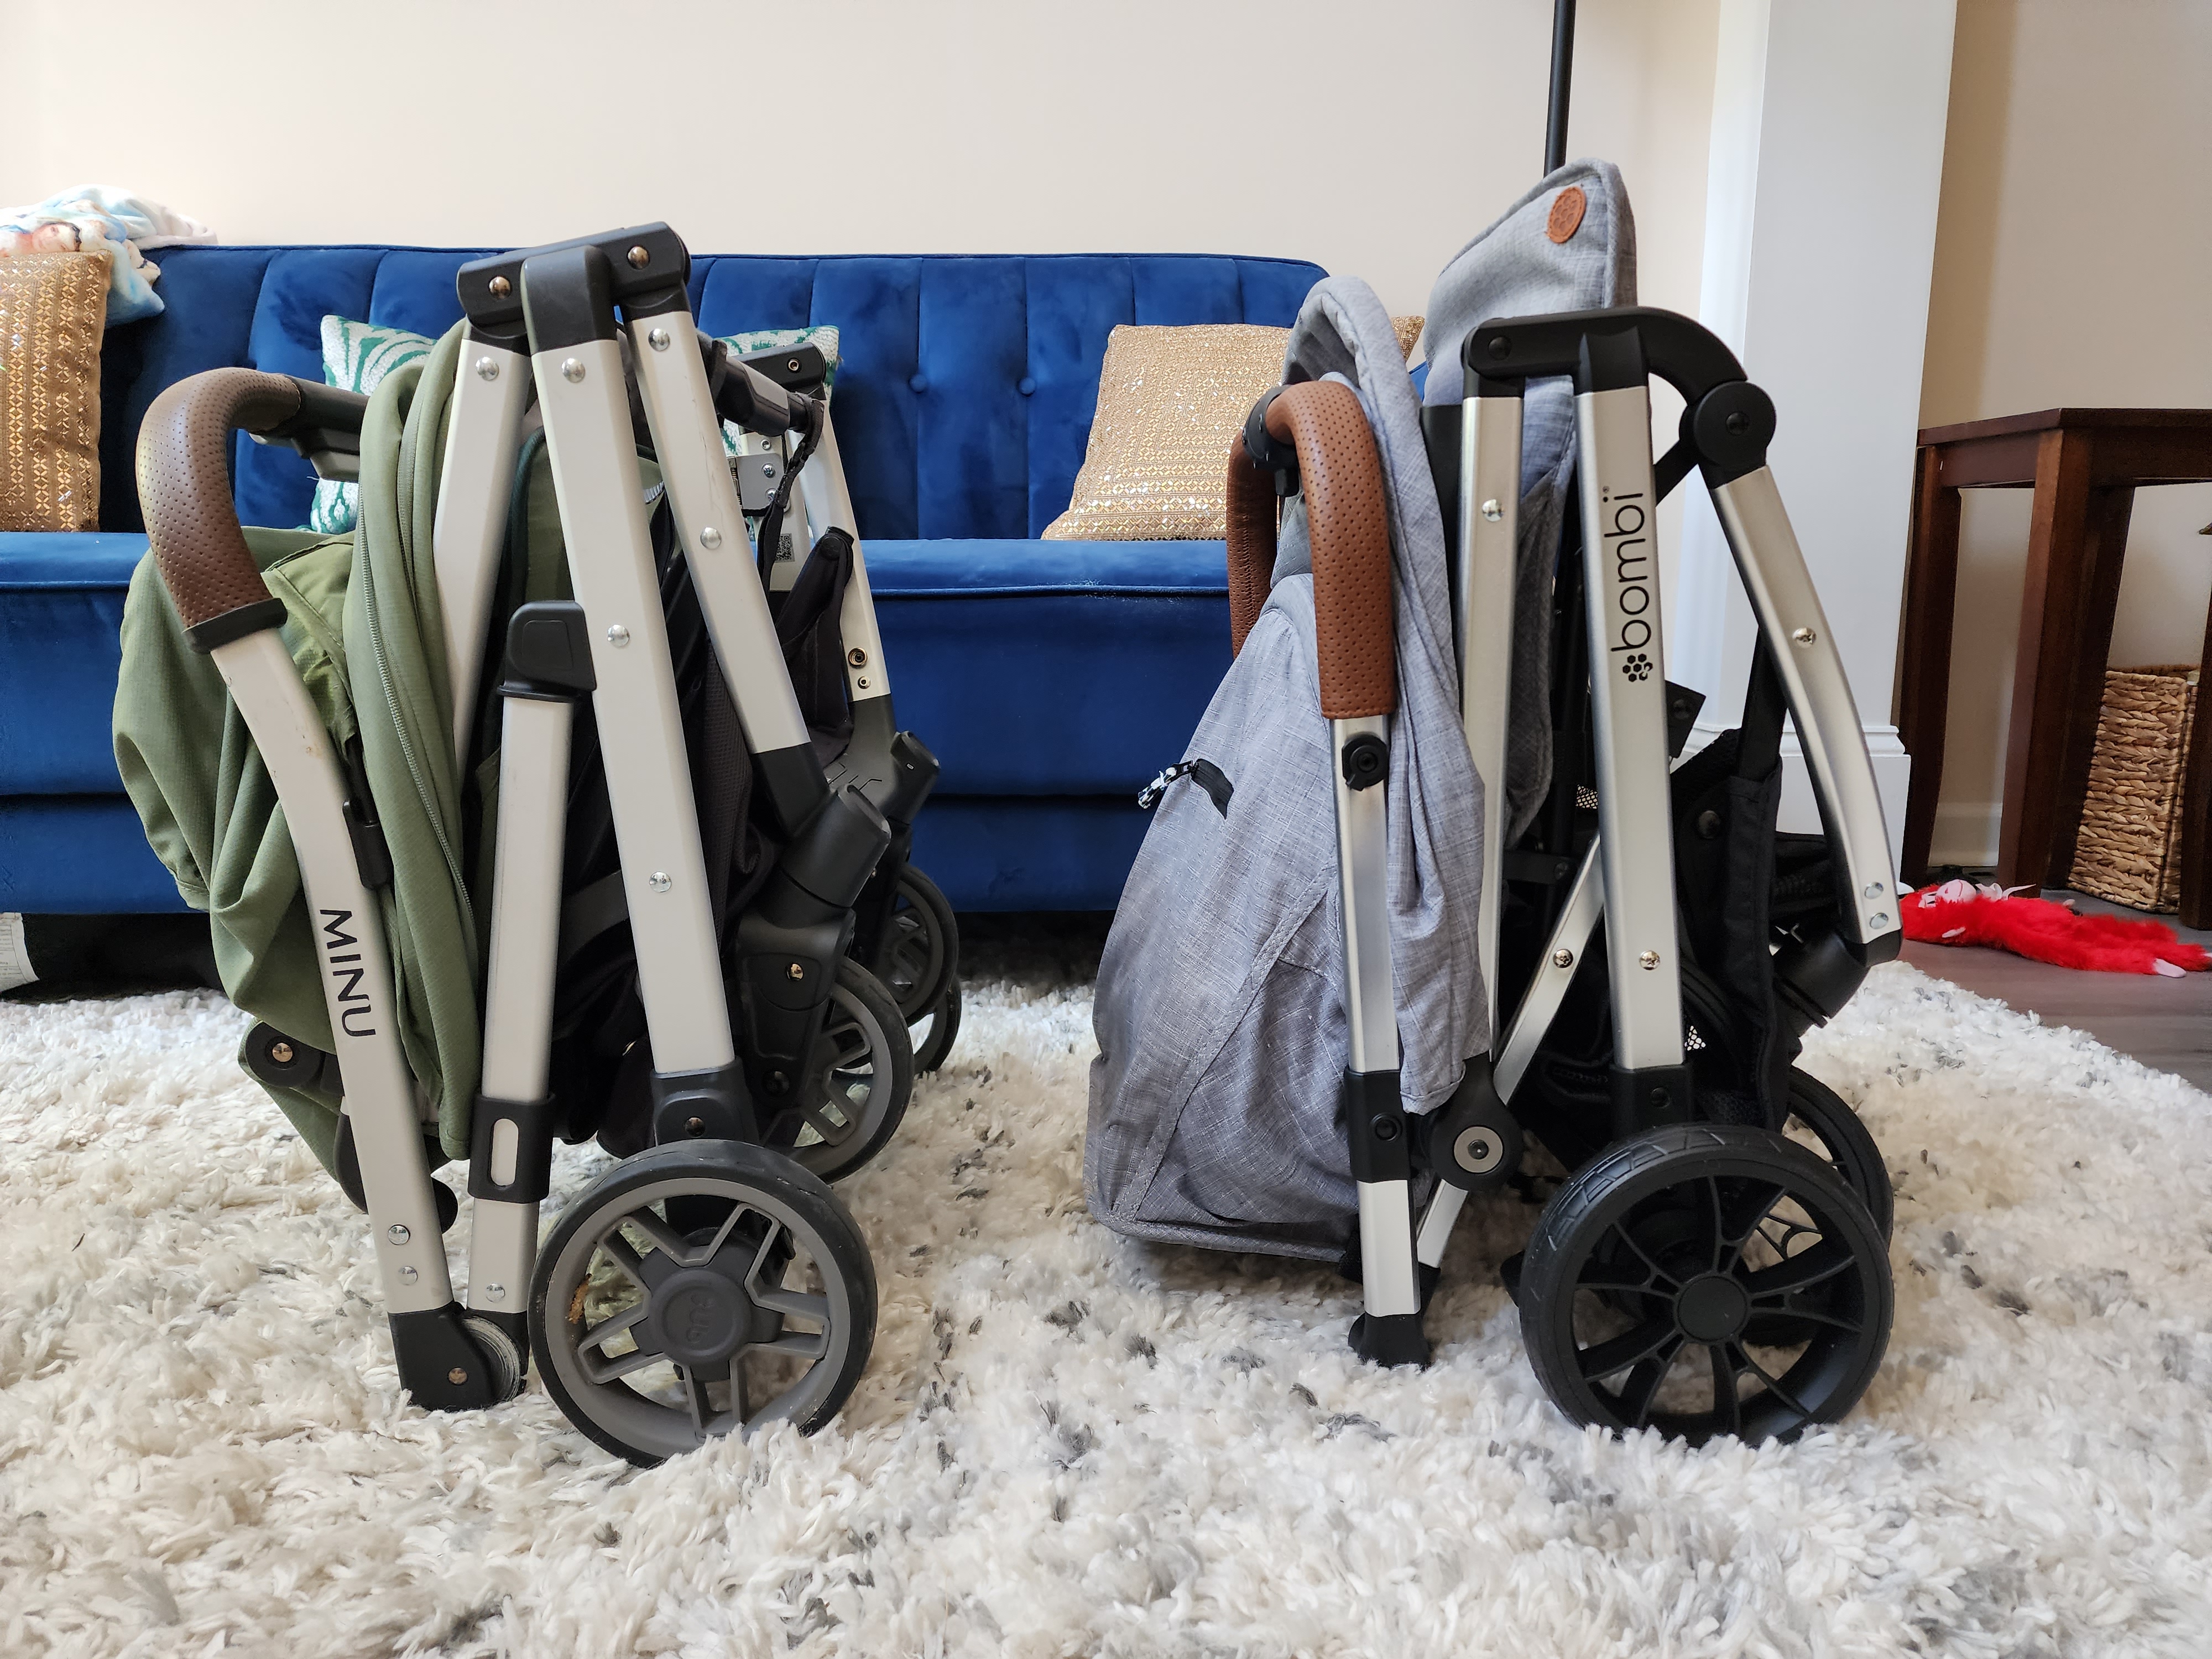 two travel strollers folded up in a living room side by side